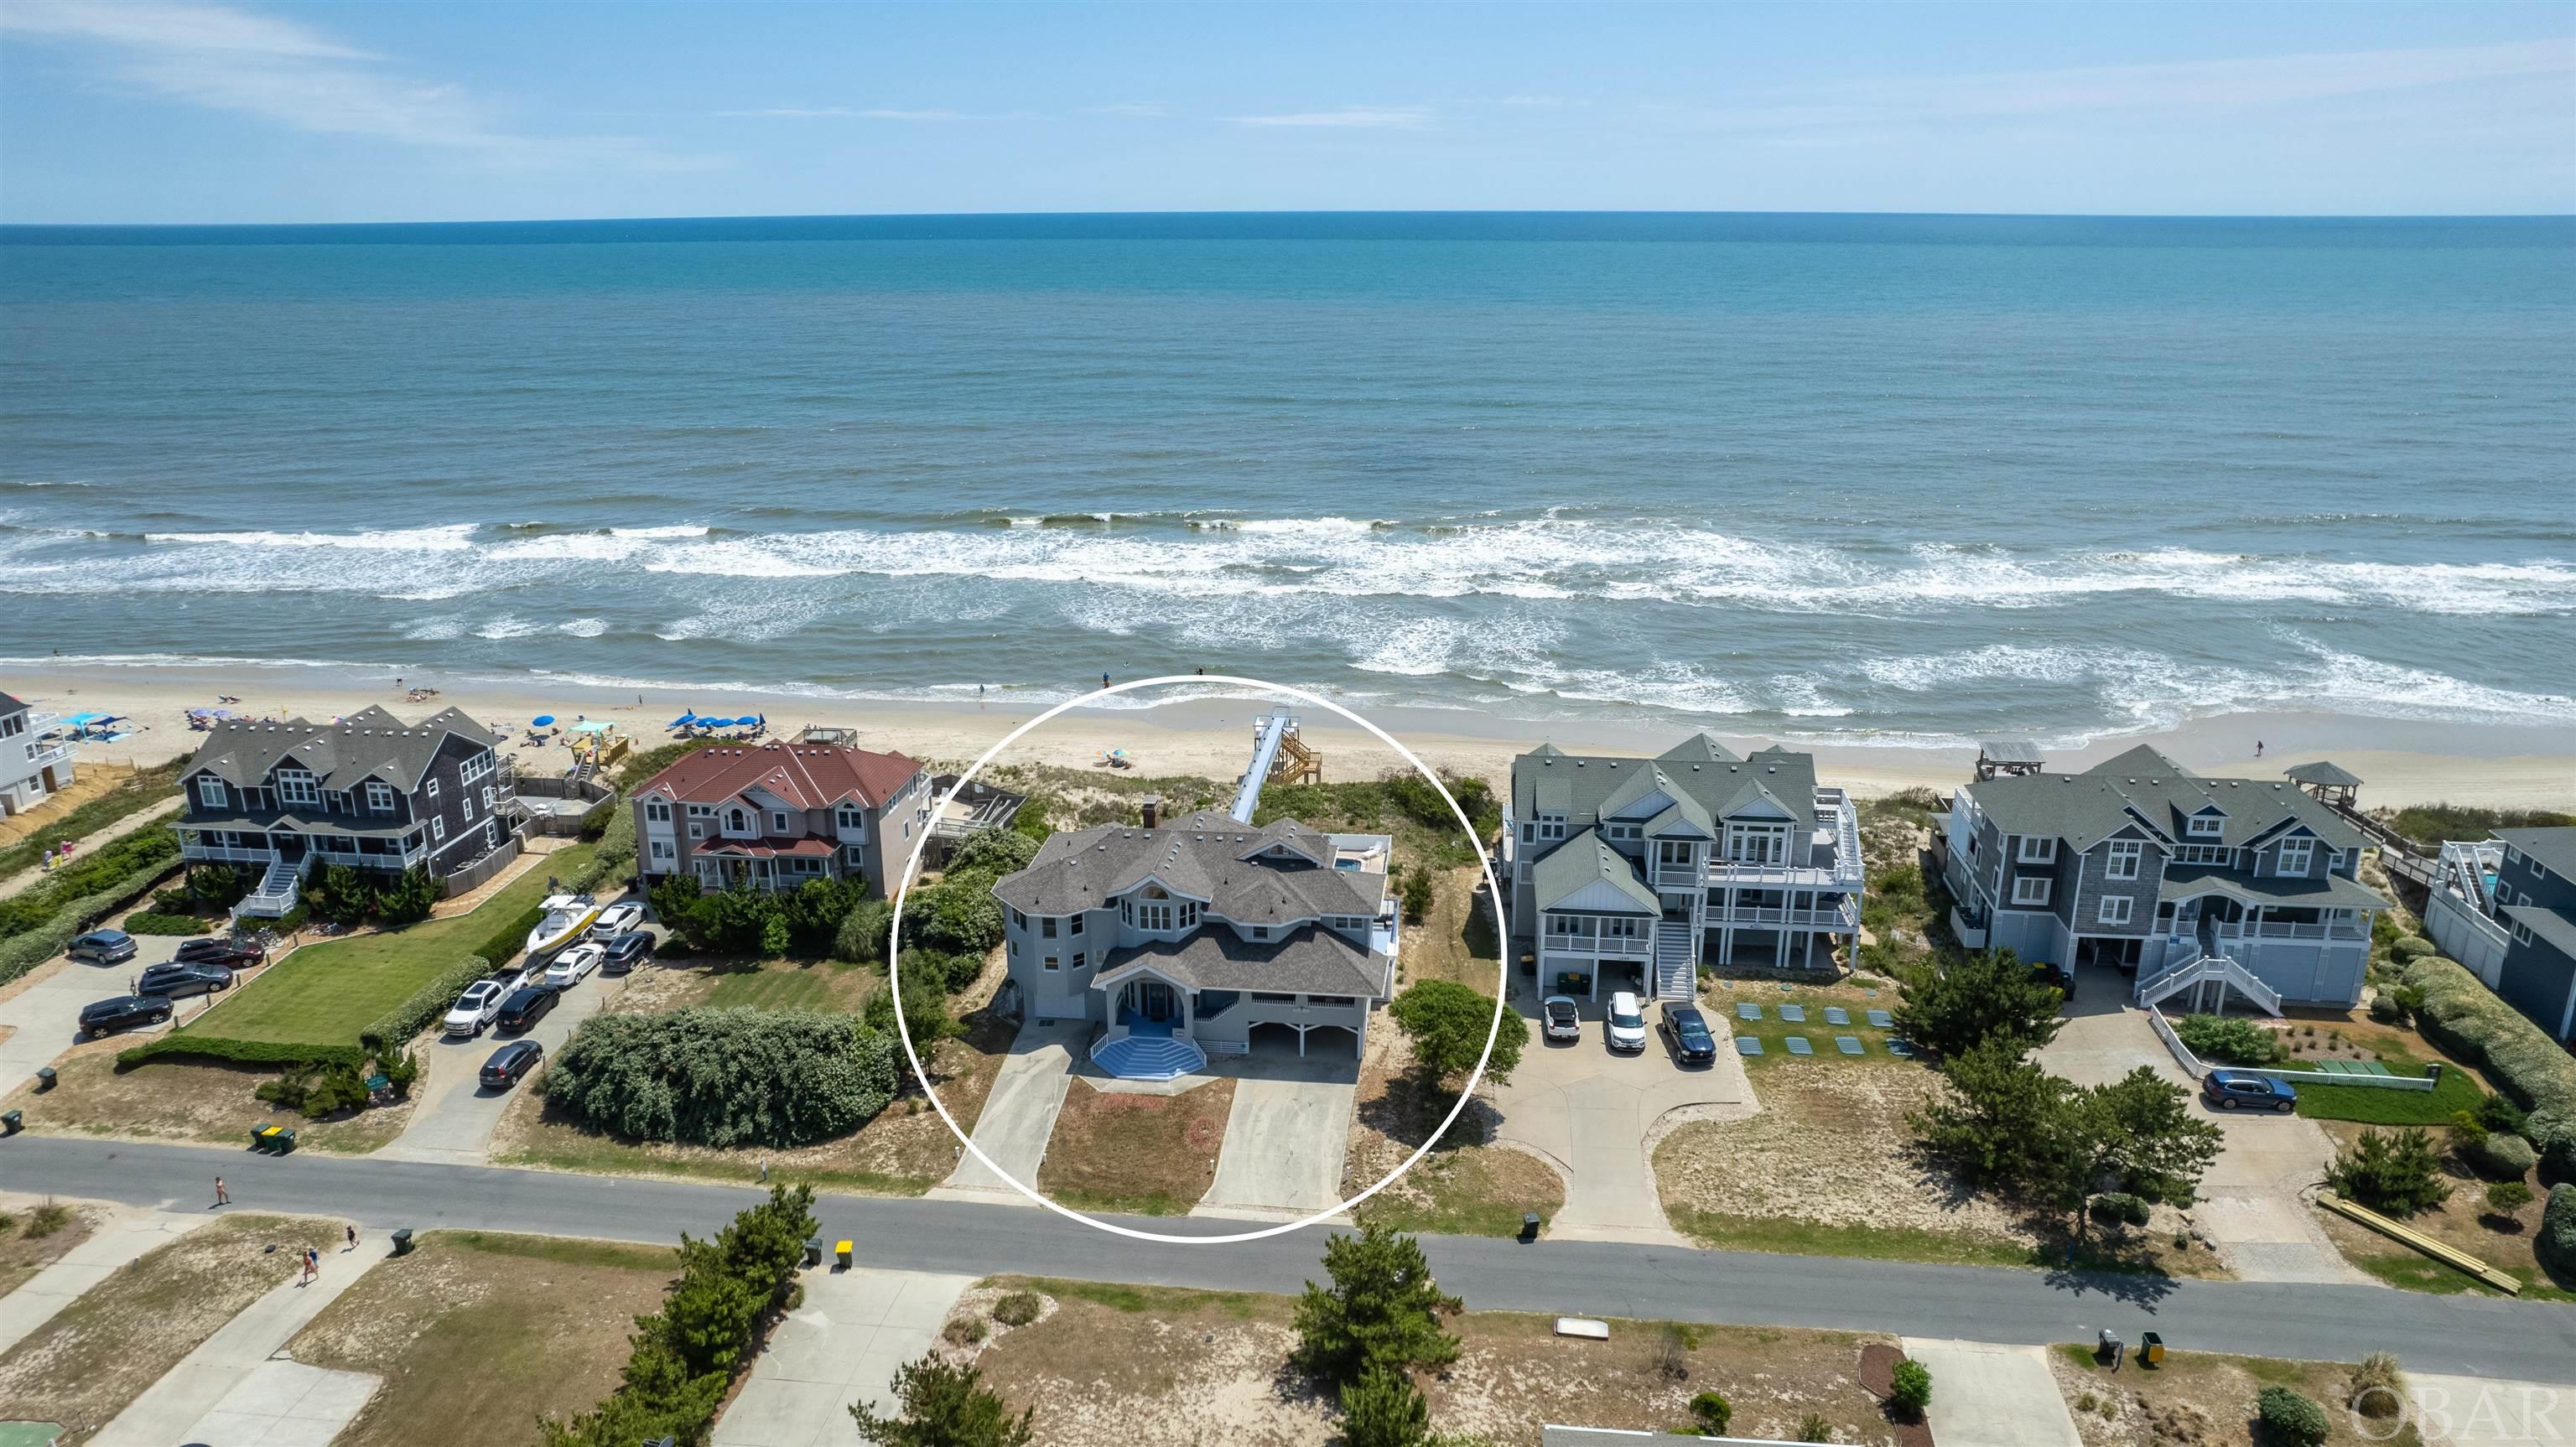 Unique Oceanfront Estate with Magnificent Ocean Views. This Craftsman-Style Cottage is situated on a Elevated 28,000 Sq Ft Lot and in an X Flood Zone! (Flood Insurance optional) Custom architectural woodwork, including stunning antique heart Pine "peg" wood floors. Designed to capture views of the Atlantic Ocean on every level. Step into the impressive 3-story Foyer with custom Juniper wood ceilings, plantation shutters, & showcasing wide custom wood stairs with Fir handrails, that lead to an open floor plan. The great room offers 2 stories of soaring windows with ocean views, Cypress wood cathedral ceilings and an impressive stone, gas fireplace, with an oceanside Catwalk -- a RARE feature -- that leads to an oceanside balcony. Gaze at the ocean from the gourmet kitchen with large kitchen island and Oak floors, gas countertop range, plantation shutters, and beautiful Spanish tile. You will also find custom cabinetry and bar for entertaining guests. Enter the massive Master Suite through arched doorways, offering an ocean-view sitting area. The impressive Master Bathroom features a clawfoot tub, double vanity, & a spacious tiled, glass shower with a teak bench, cedar lined closets, and Bidet. All of the other bedrooms and bathrooms are spacious, with large closets and room for expansion. Relax & enjoy the Ocean breeze from your Private Pool (Installed 2018), Hot Tub (2018), Covered Decks, and Personal Beach Boardwalk (recently remodeled). Notable features include a Ship's Watch on the 4th floor, with private balcony and rooftop deck, offering spectacular ocean views, plantation shutters that are found throughout the home, custom woodwork, arched doors, and an oversized garage/workshop, that could be made into a Game Room. Located in the desirable Ocean Hill subdivision. Did I mention, it is SOLD FURNISHED!!! New Trane HVACs Installed 2019 & 2022. New Septic System 2017. New Anderson windows 2022, new gas fireplace 2022, exterior painted 2022, new hot water heaters 2022. Decks repaired and painted, 2022. Confirmed Room for Elevator. Projected to generate $225,000. ***Already booked over $152,000. for 2023 season!